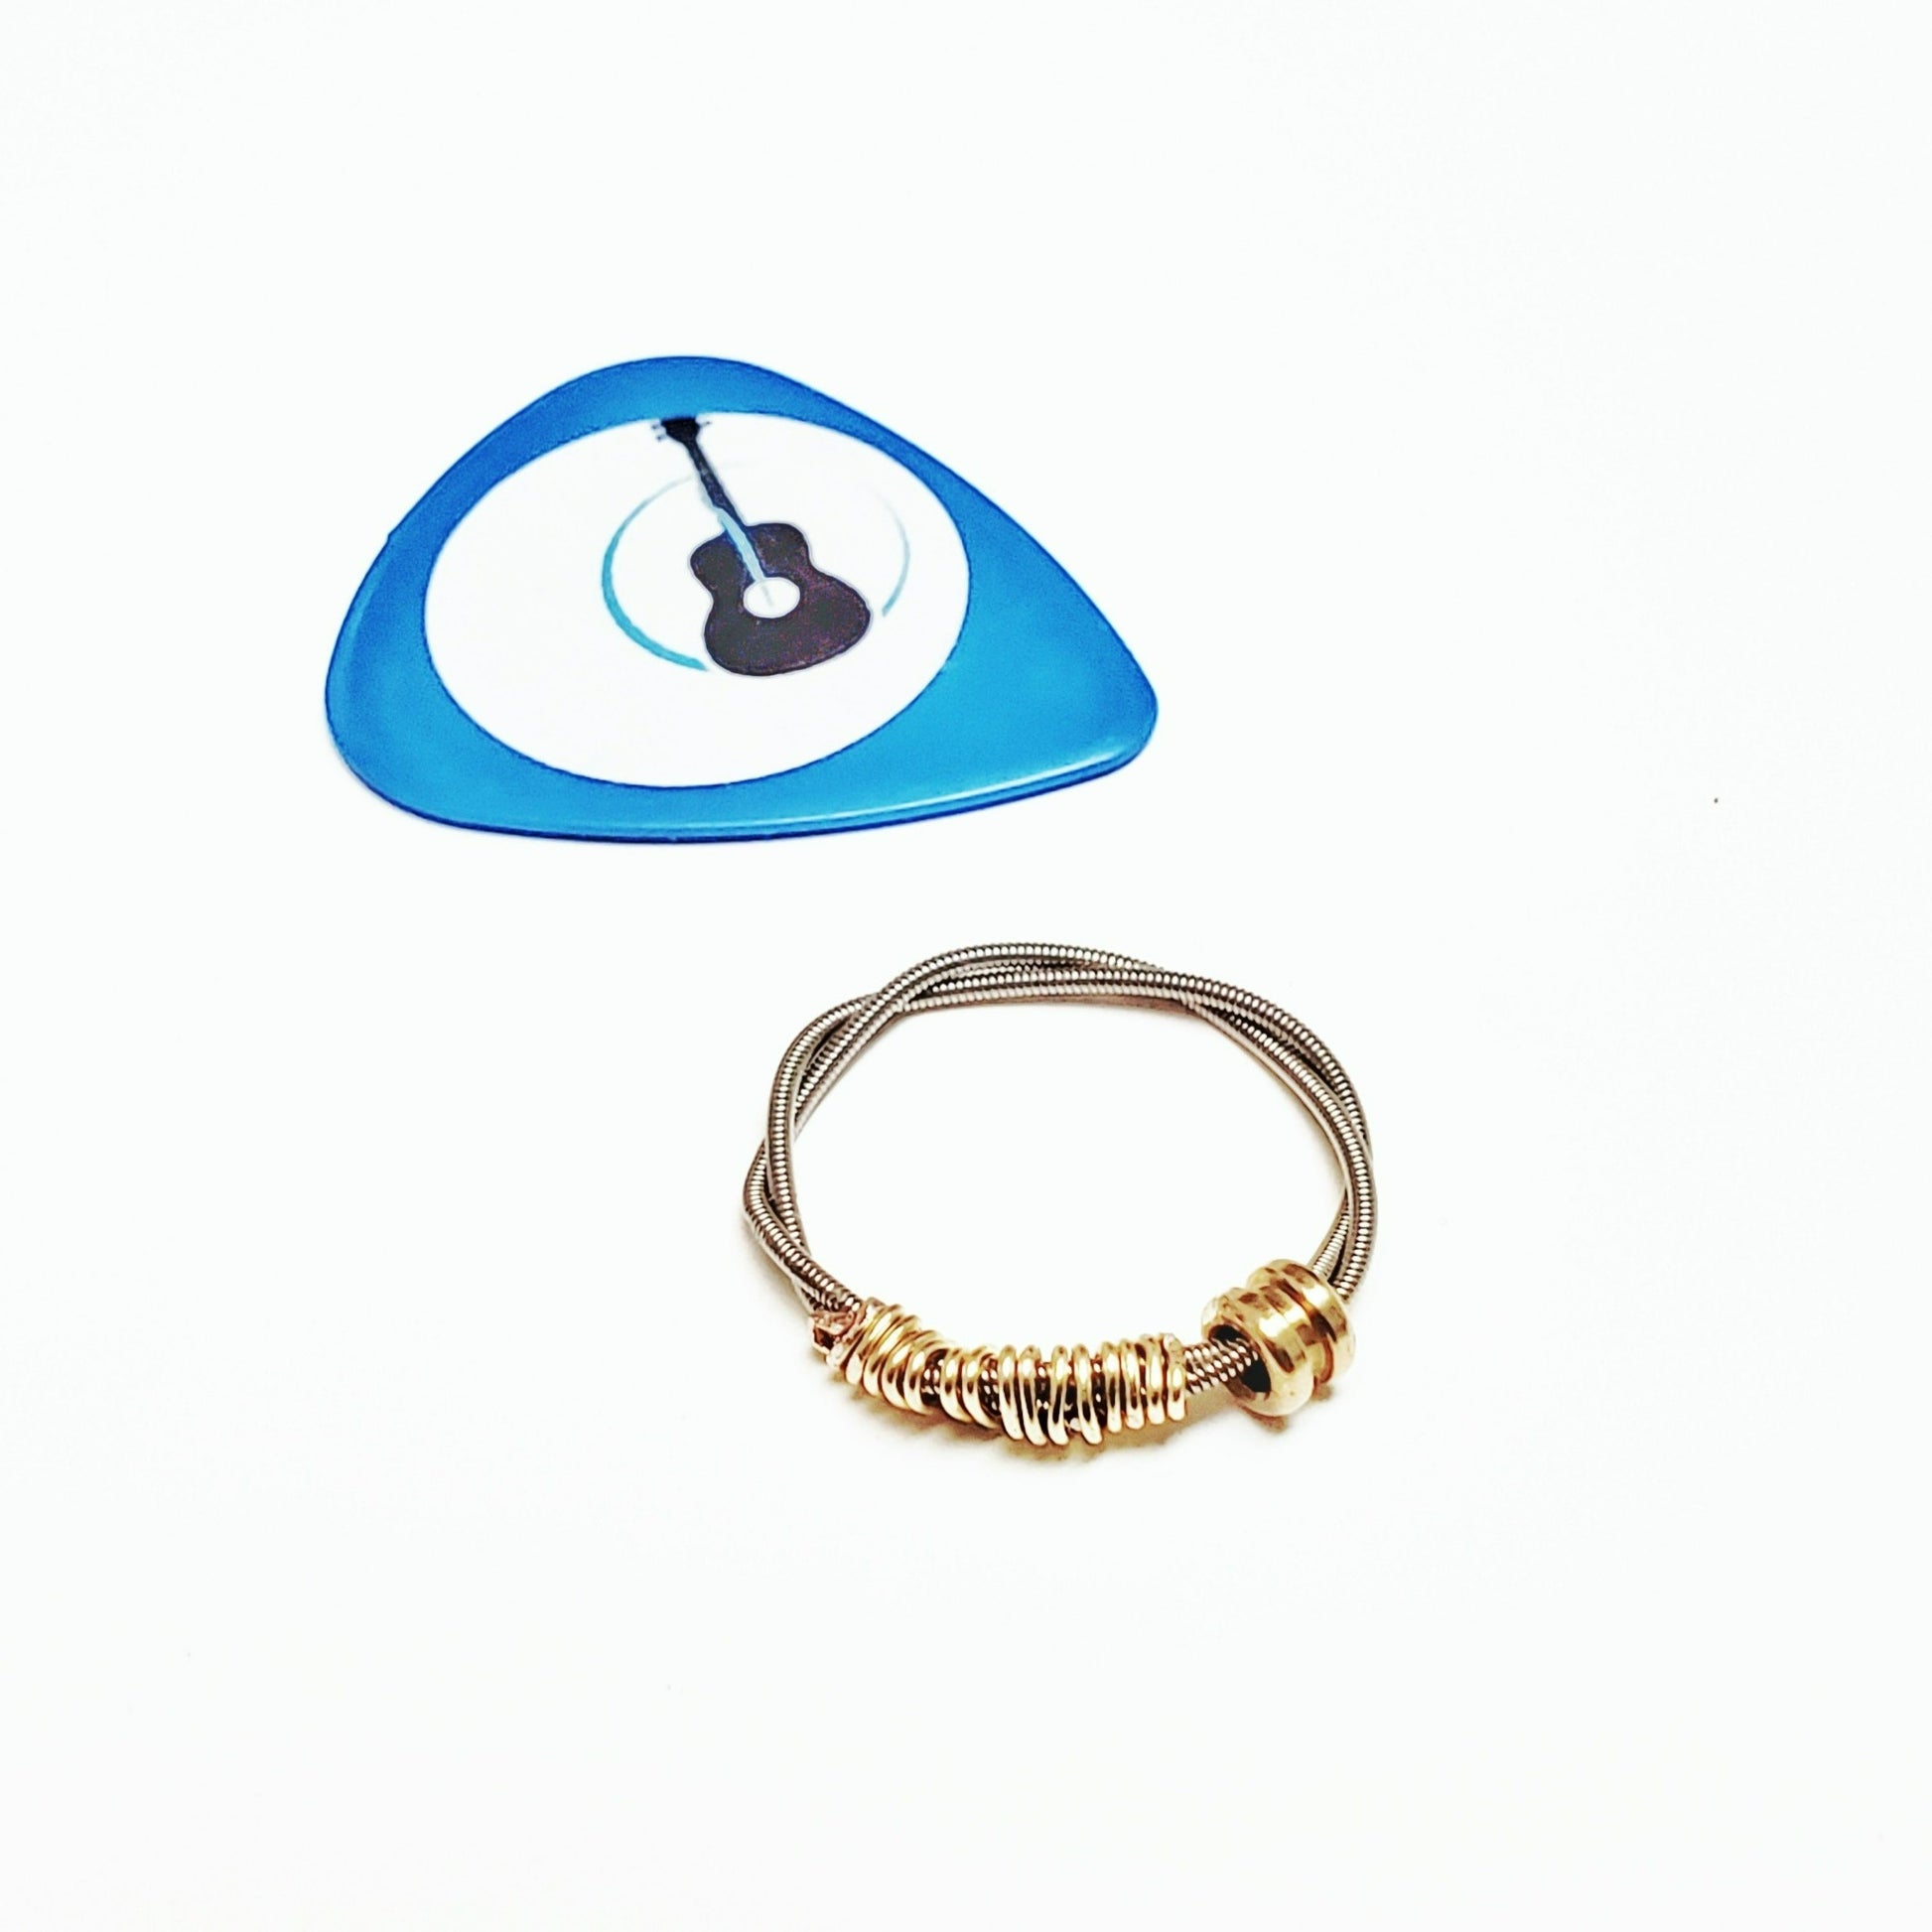 guitar string fidget ring with a gold coloured ballend above it is a blue guitar pick with an image of a black guitar - white background